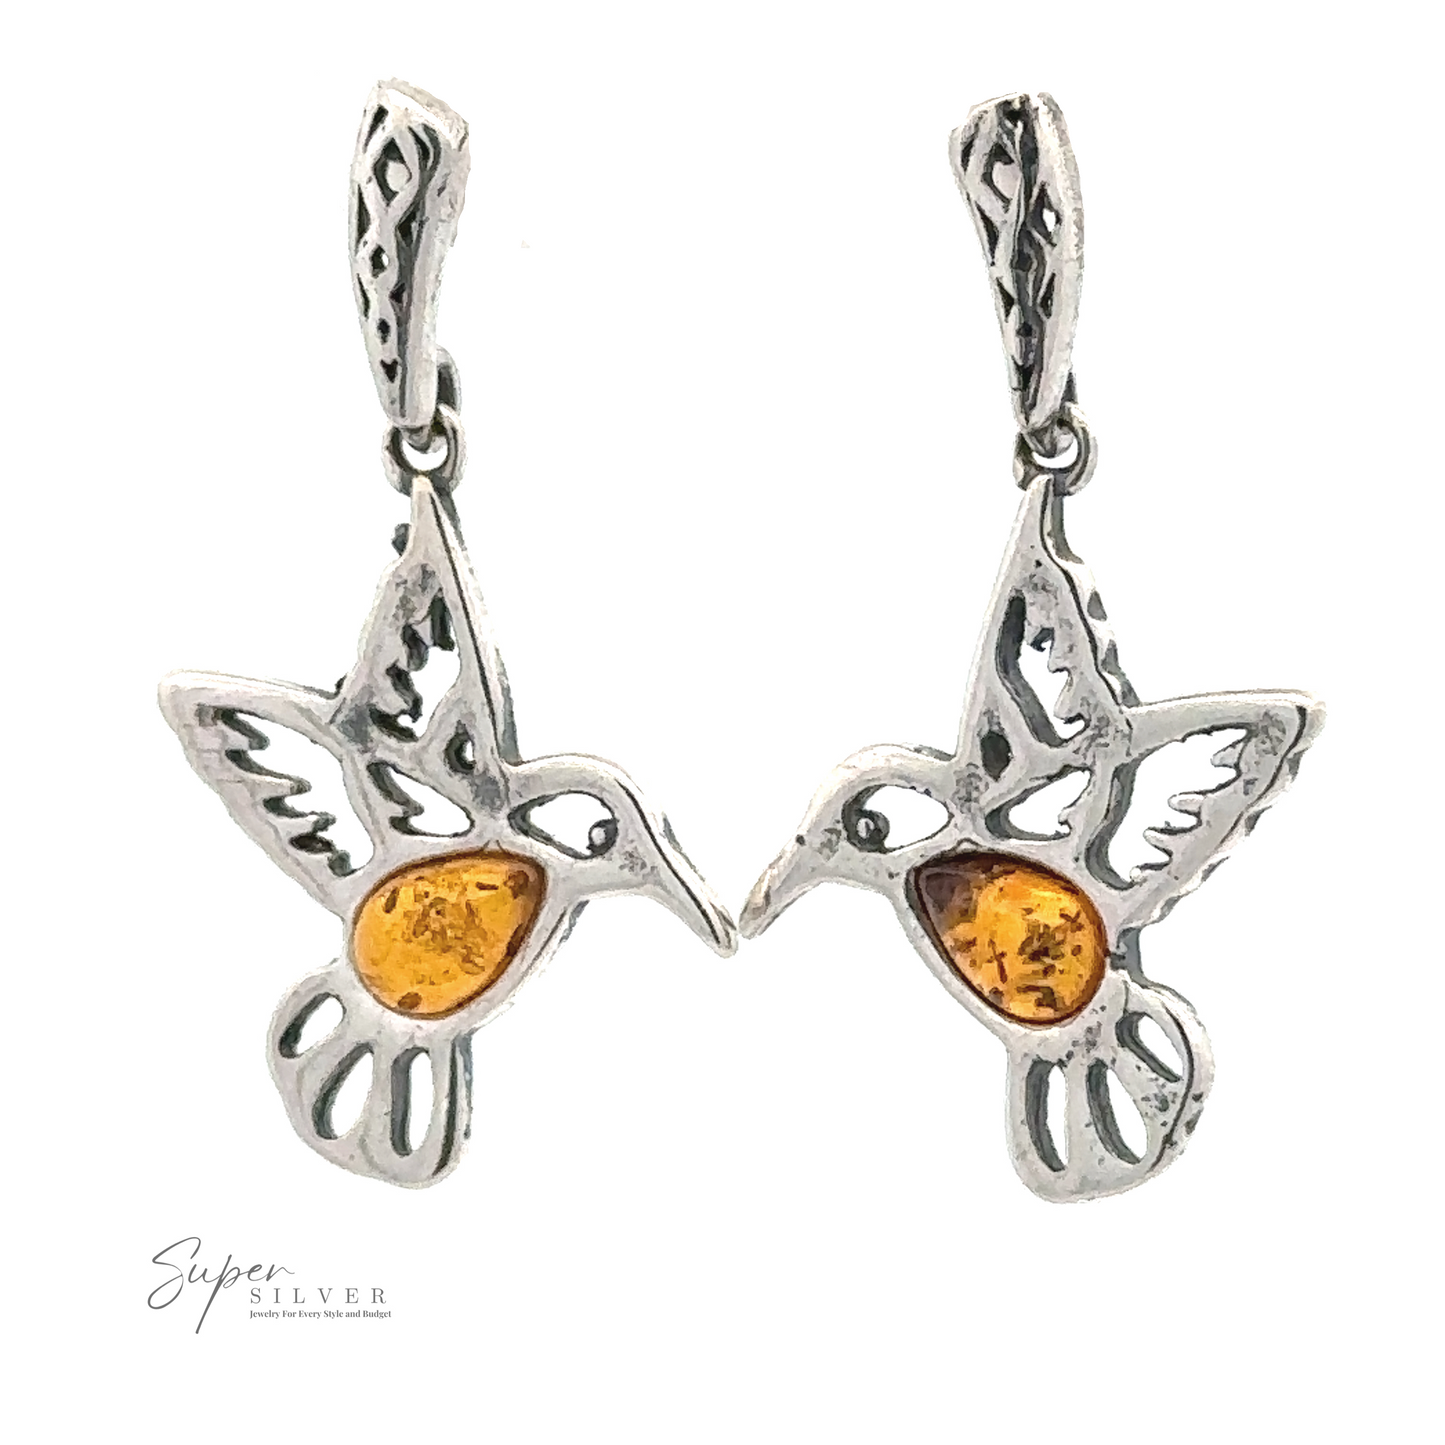 A pair of Amber Hummingbird Earrings, believed to bring good luck.